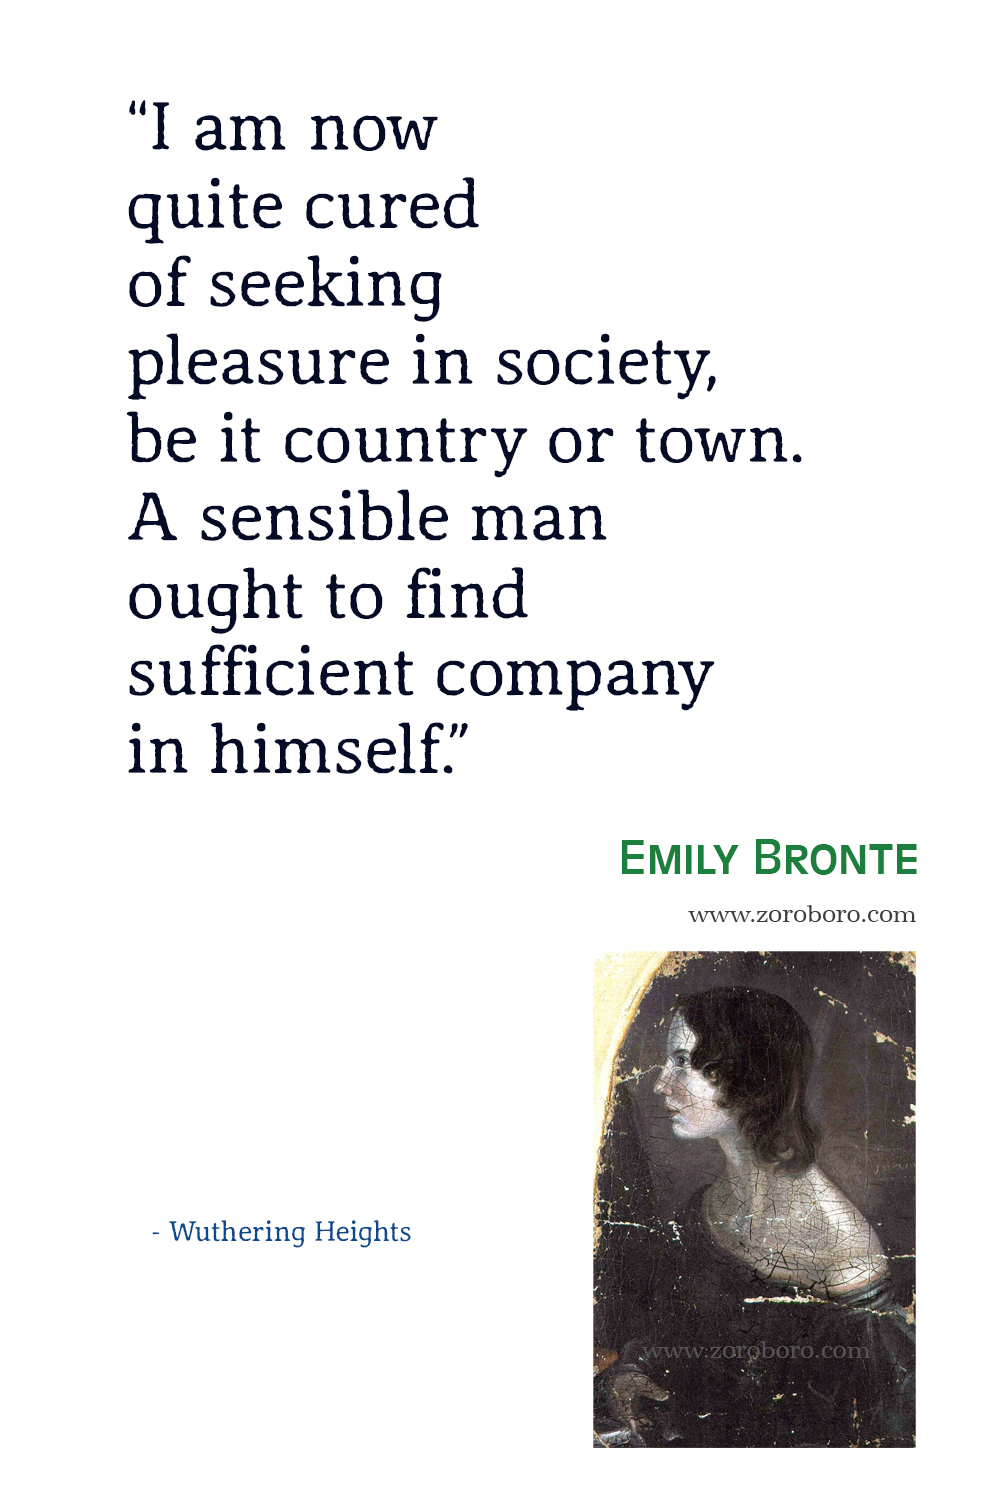 Emily Brontë Quotes, Emily Bronte Wuthering Heights Quotes, Emily Bronte Poem, Emily Bronte Books Quotes, Emily Bronte Poetry, Emily Bronte